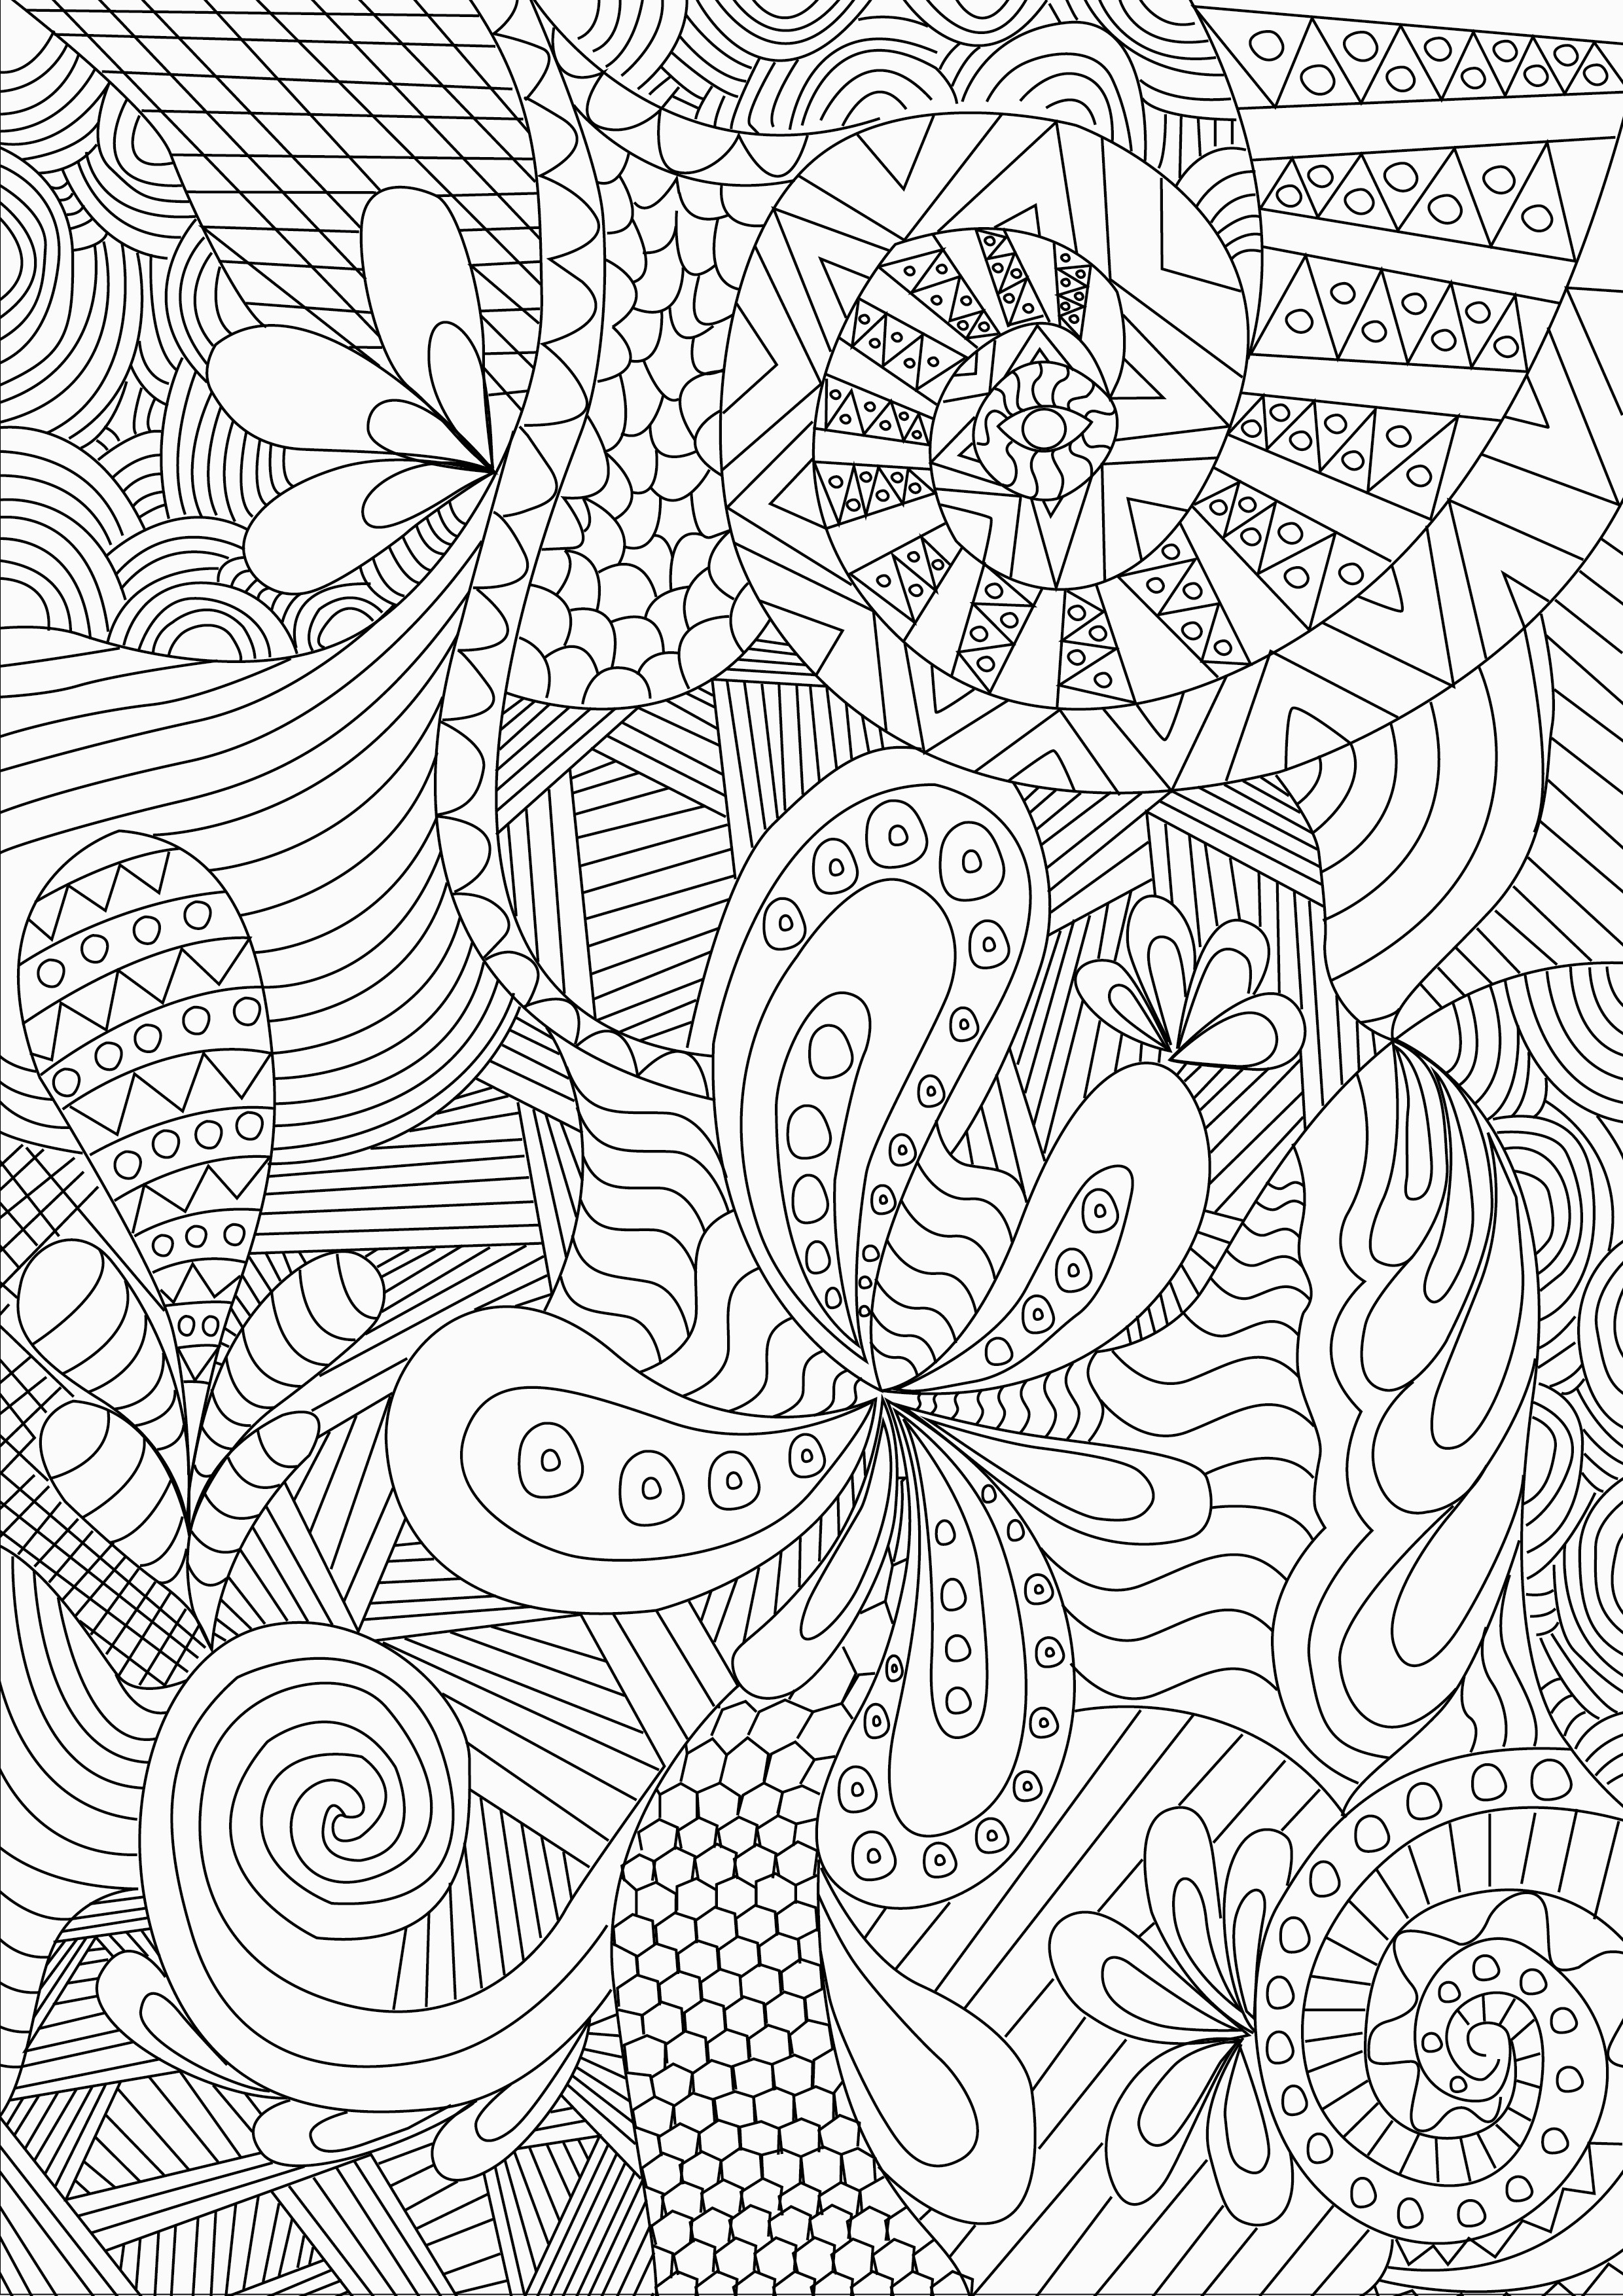 Zentangle Coloring Sheets For Boys
 Zentangle Colouring Pages In The Playroom